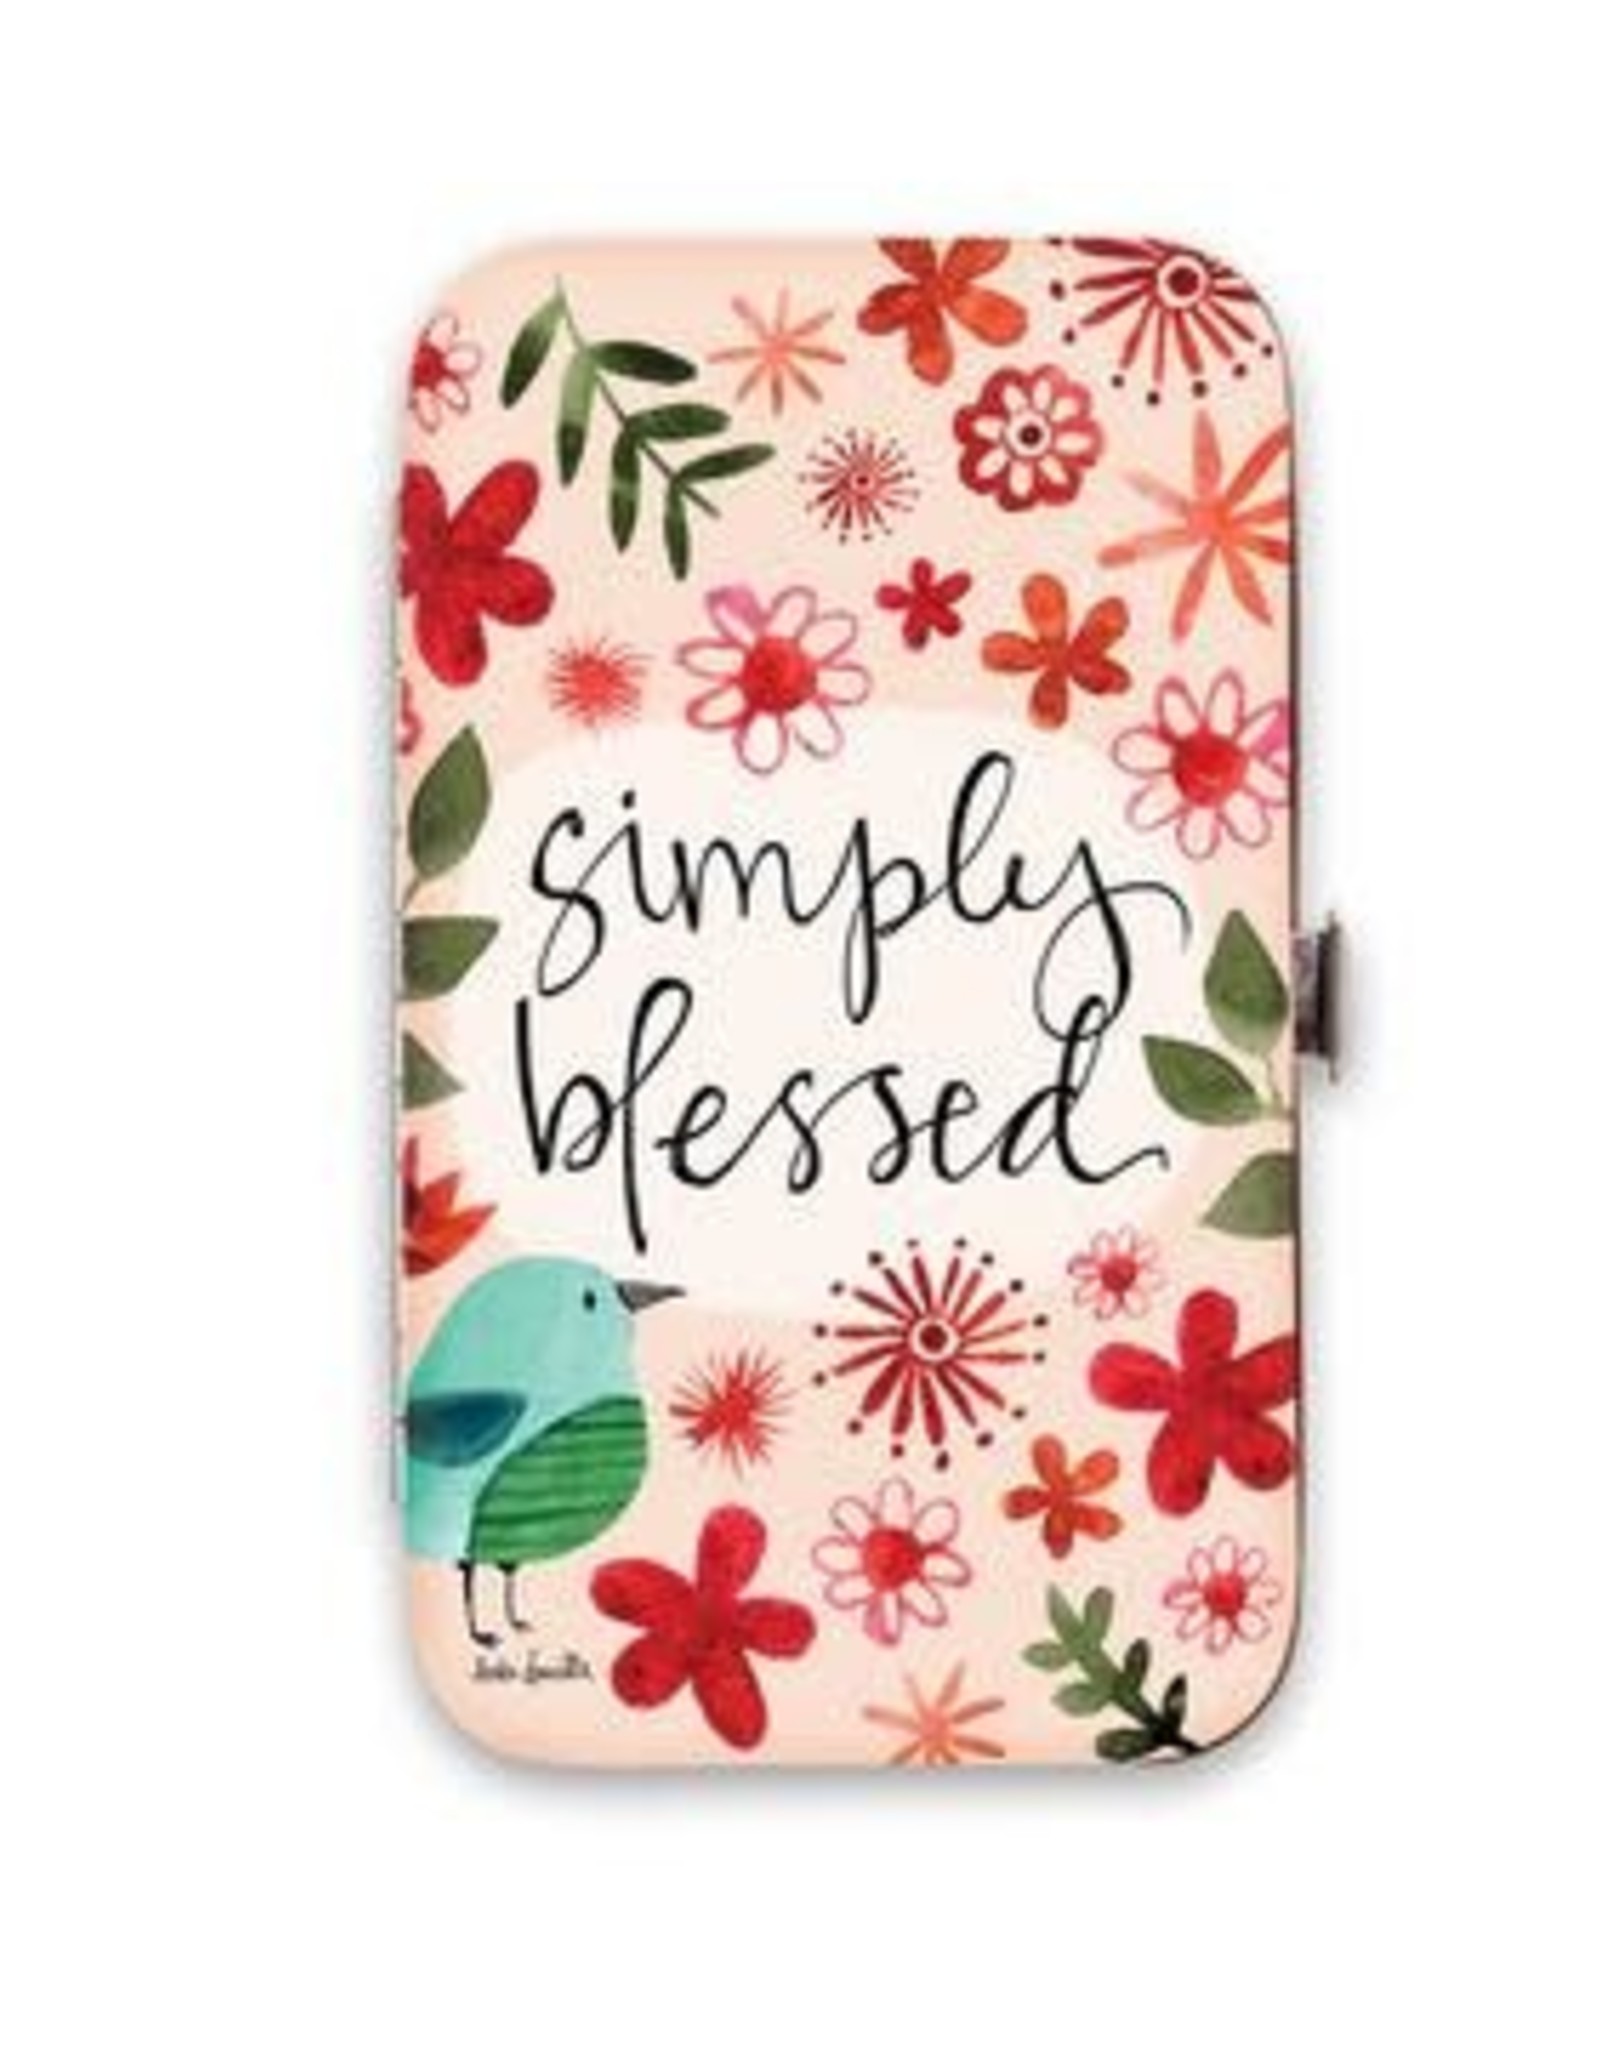 Manicure Set: Simply Blessed